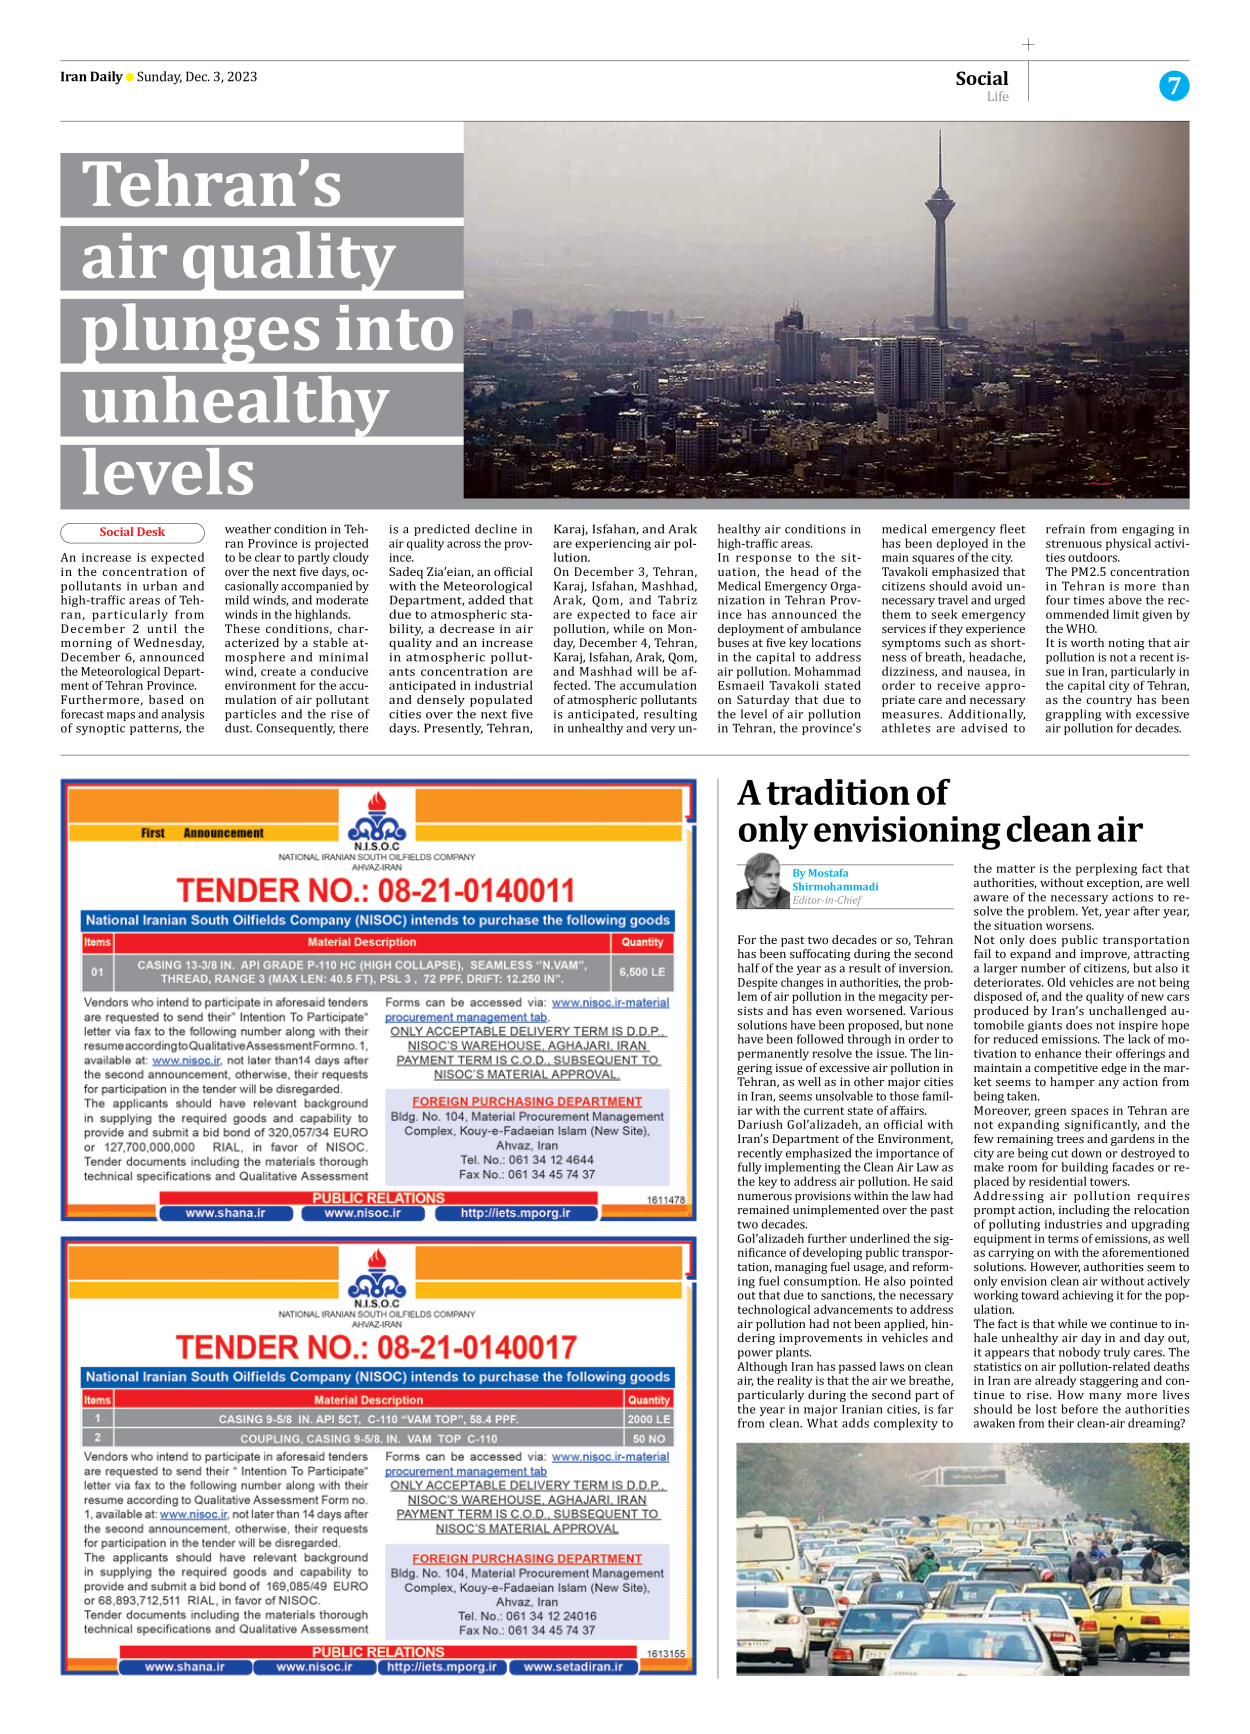 Iran Daily - Number Seven Thousand Four Hundred and Fifty - 03 December 2023 - Page 7